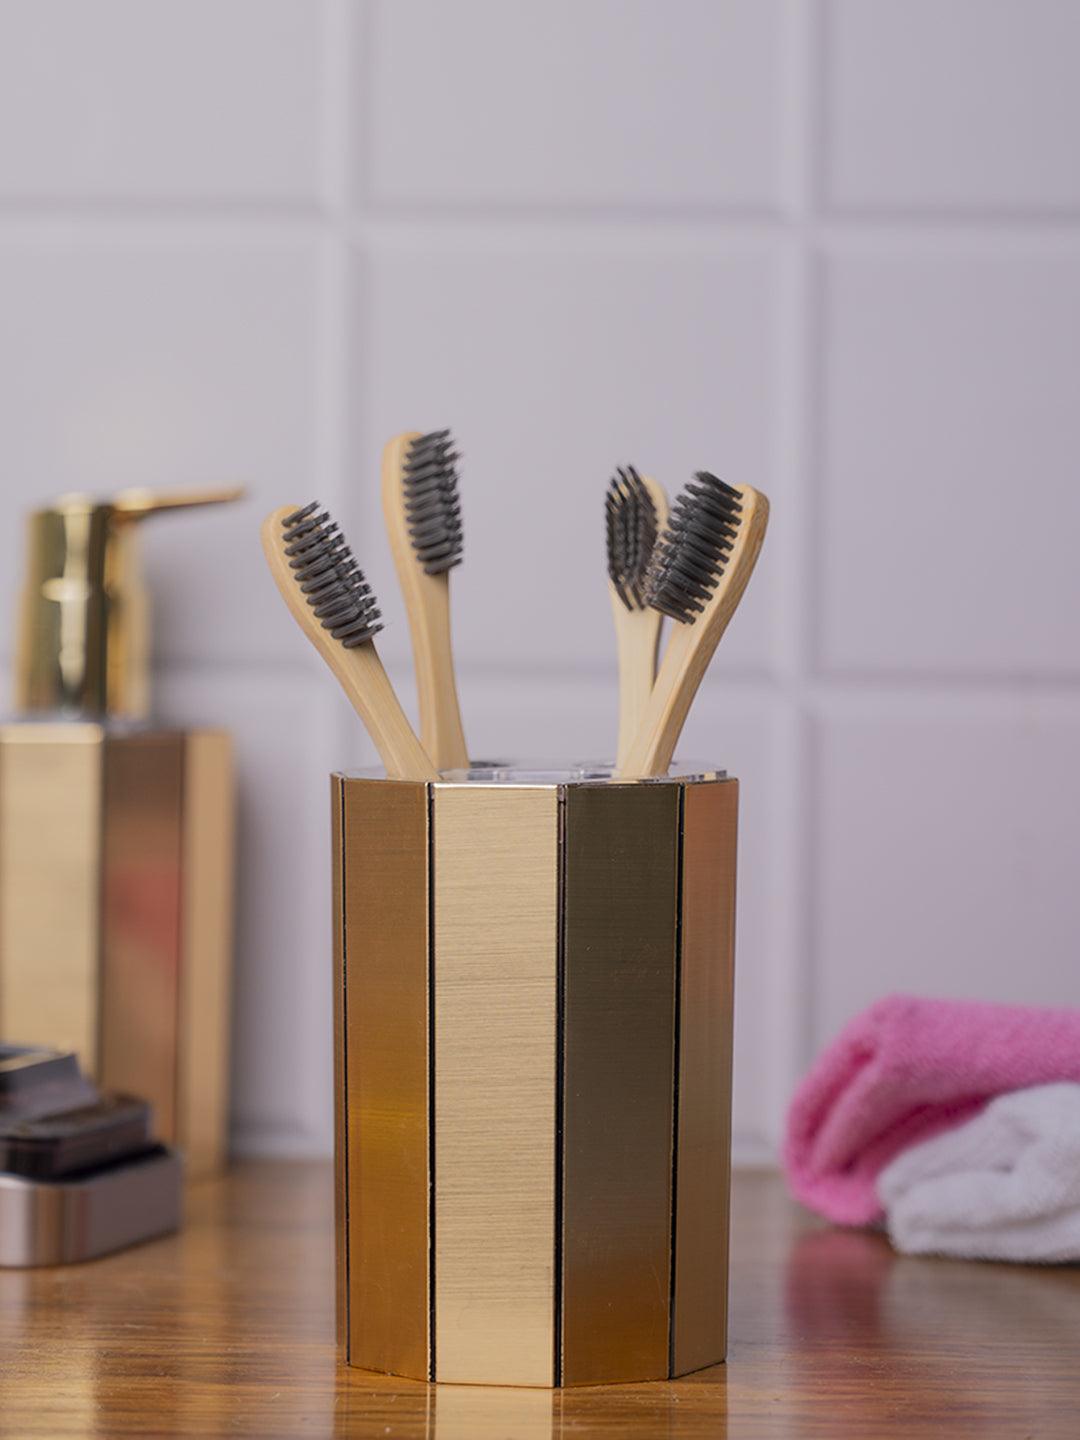 Buy Stylish Tooth Brush Holder - Golden at the best price on